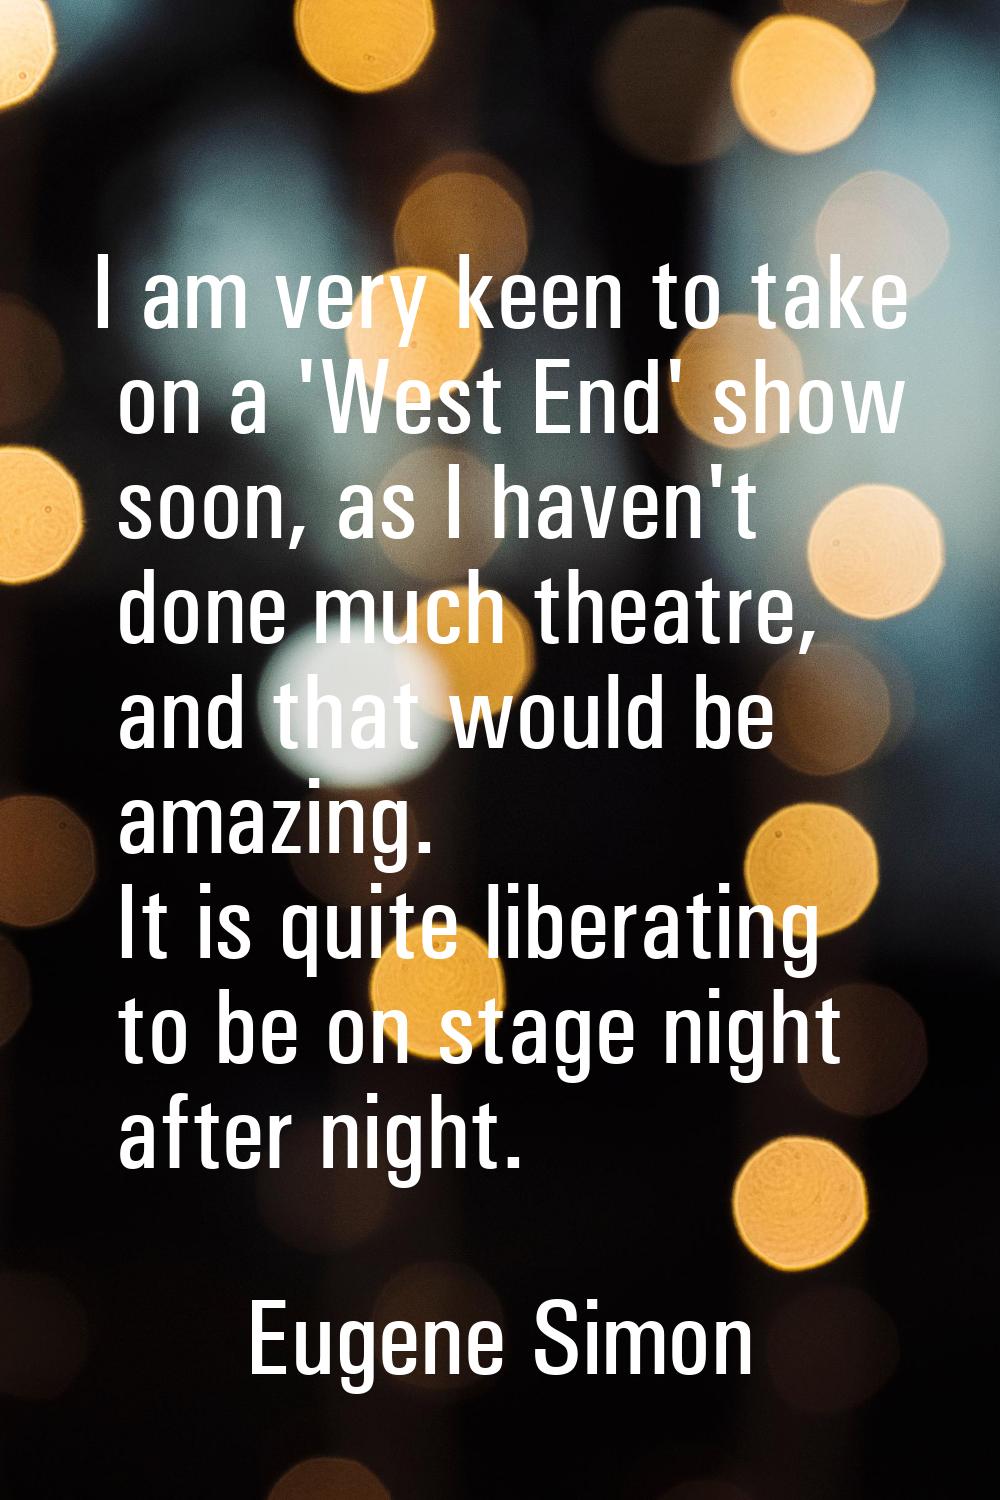 I am very keen to take on a 'West End' show soon, as I haven't done much theatre, and that would be